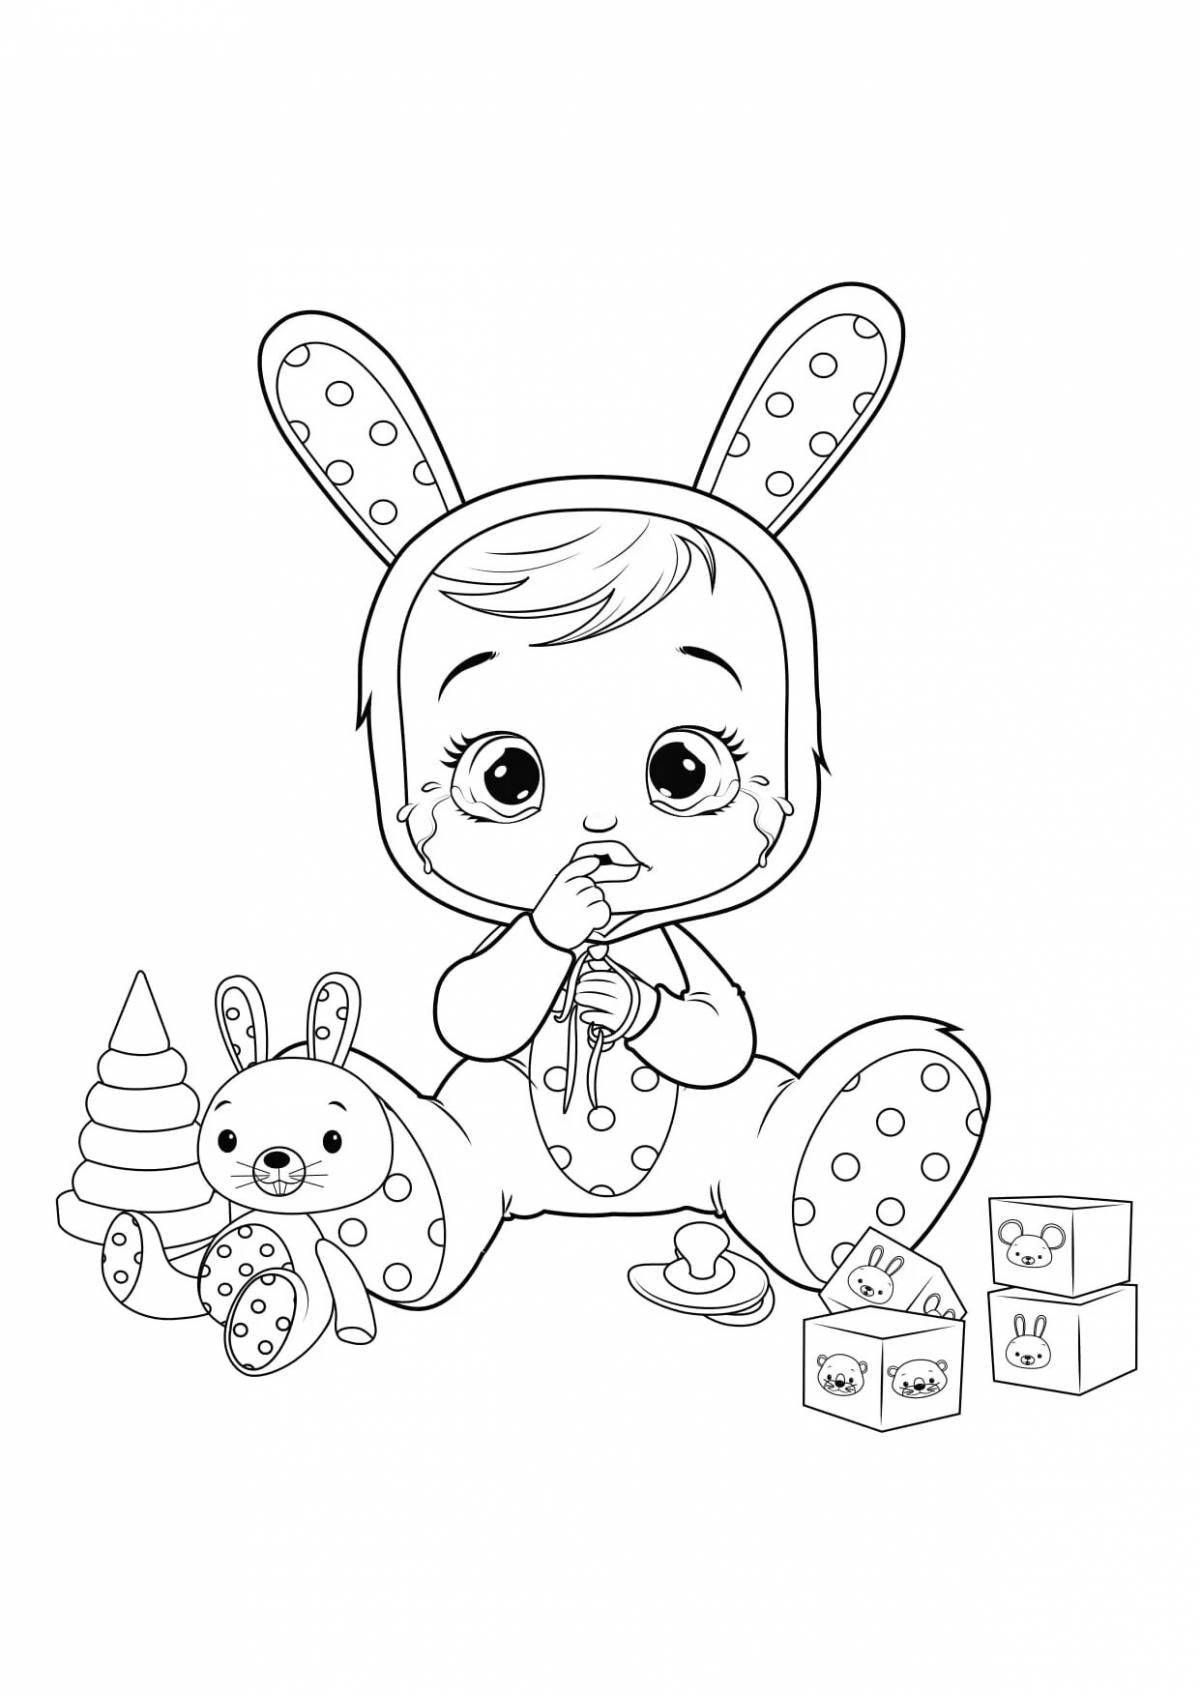 Adorable bunny doll coloring